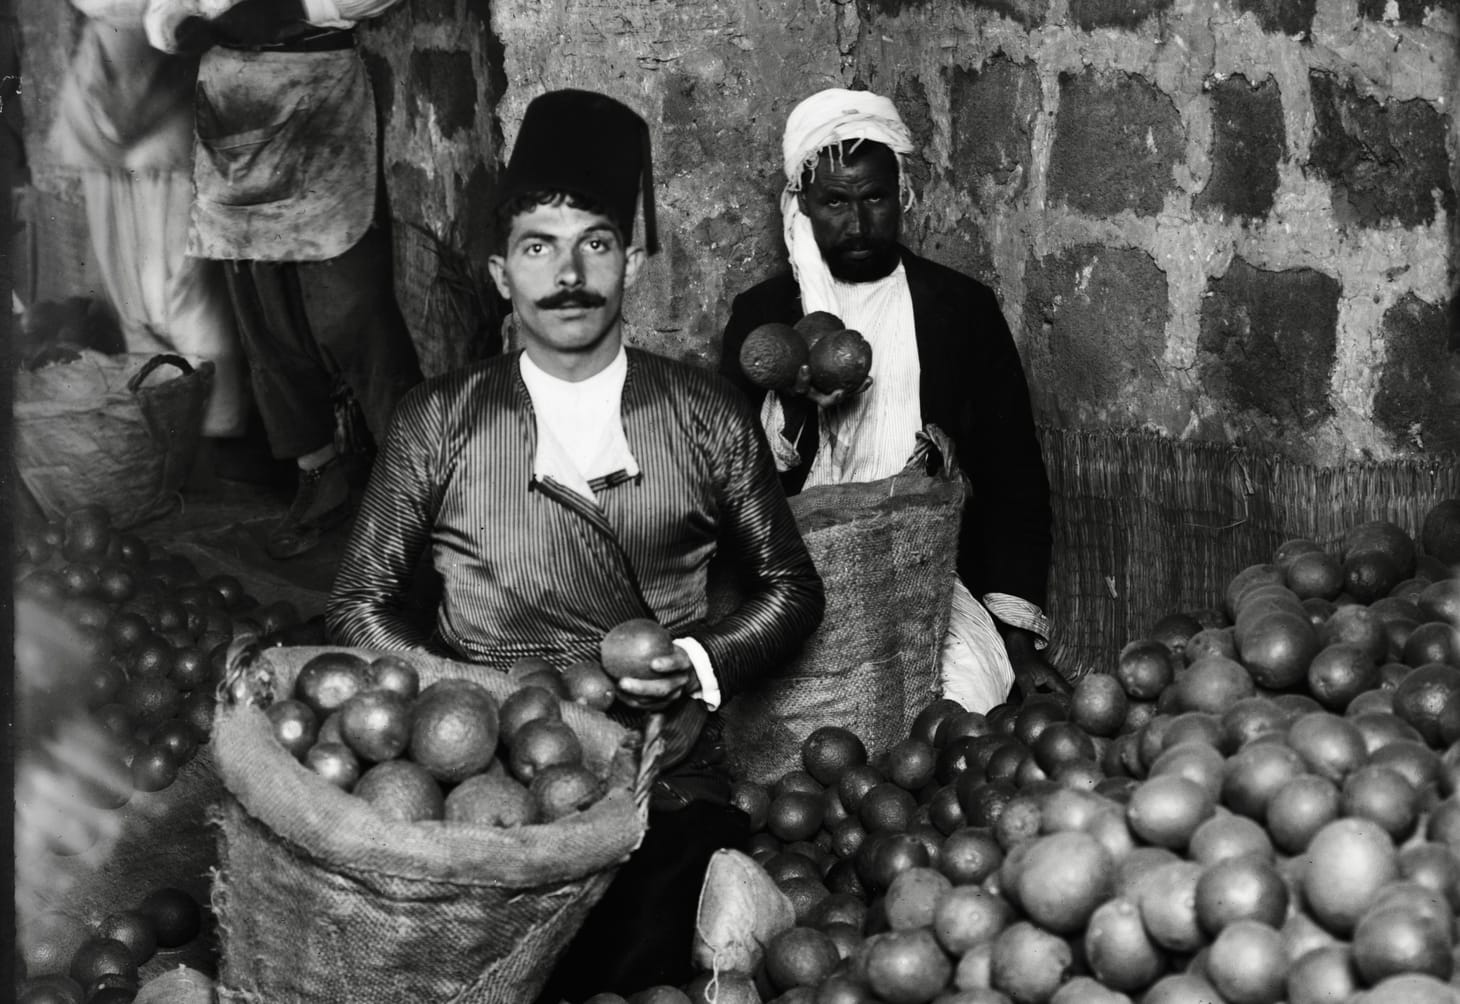 “The Young Man Loved Jaffa”: Ottoman Palestine in the Late Nineteenth Century